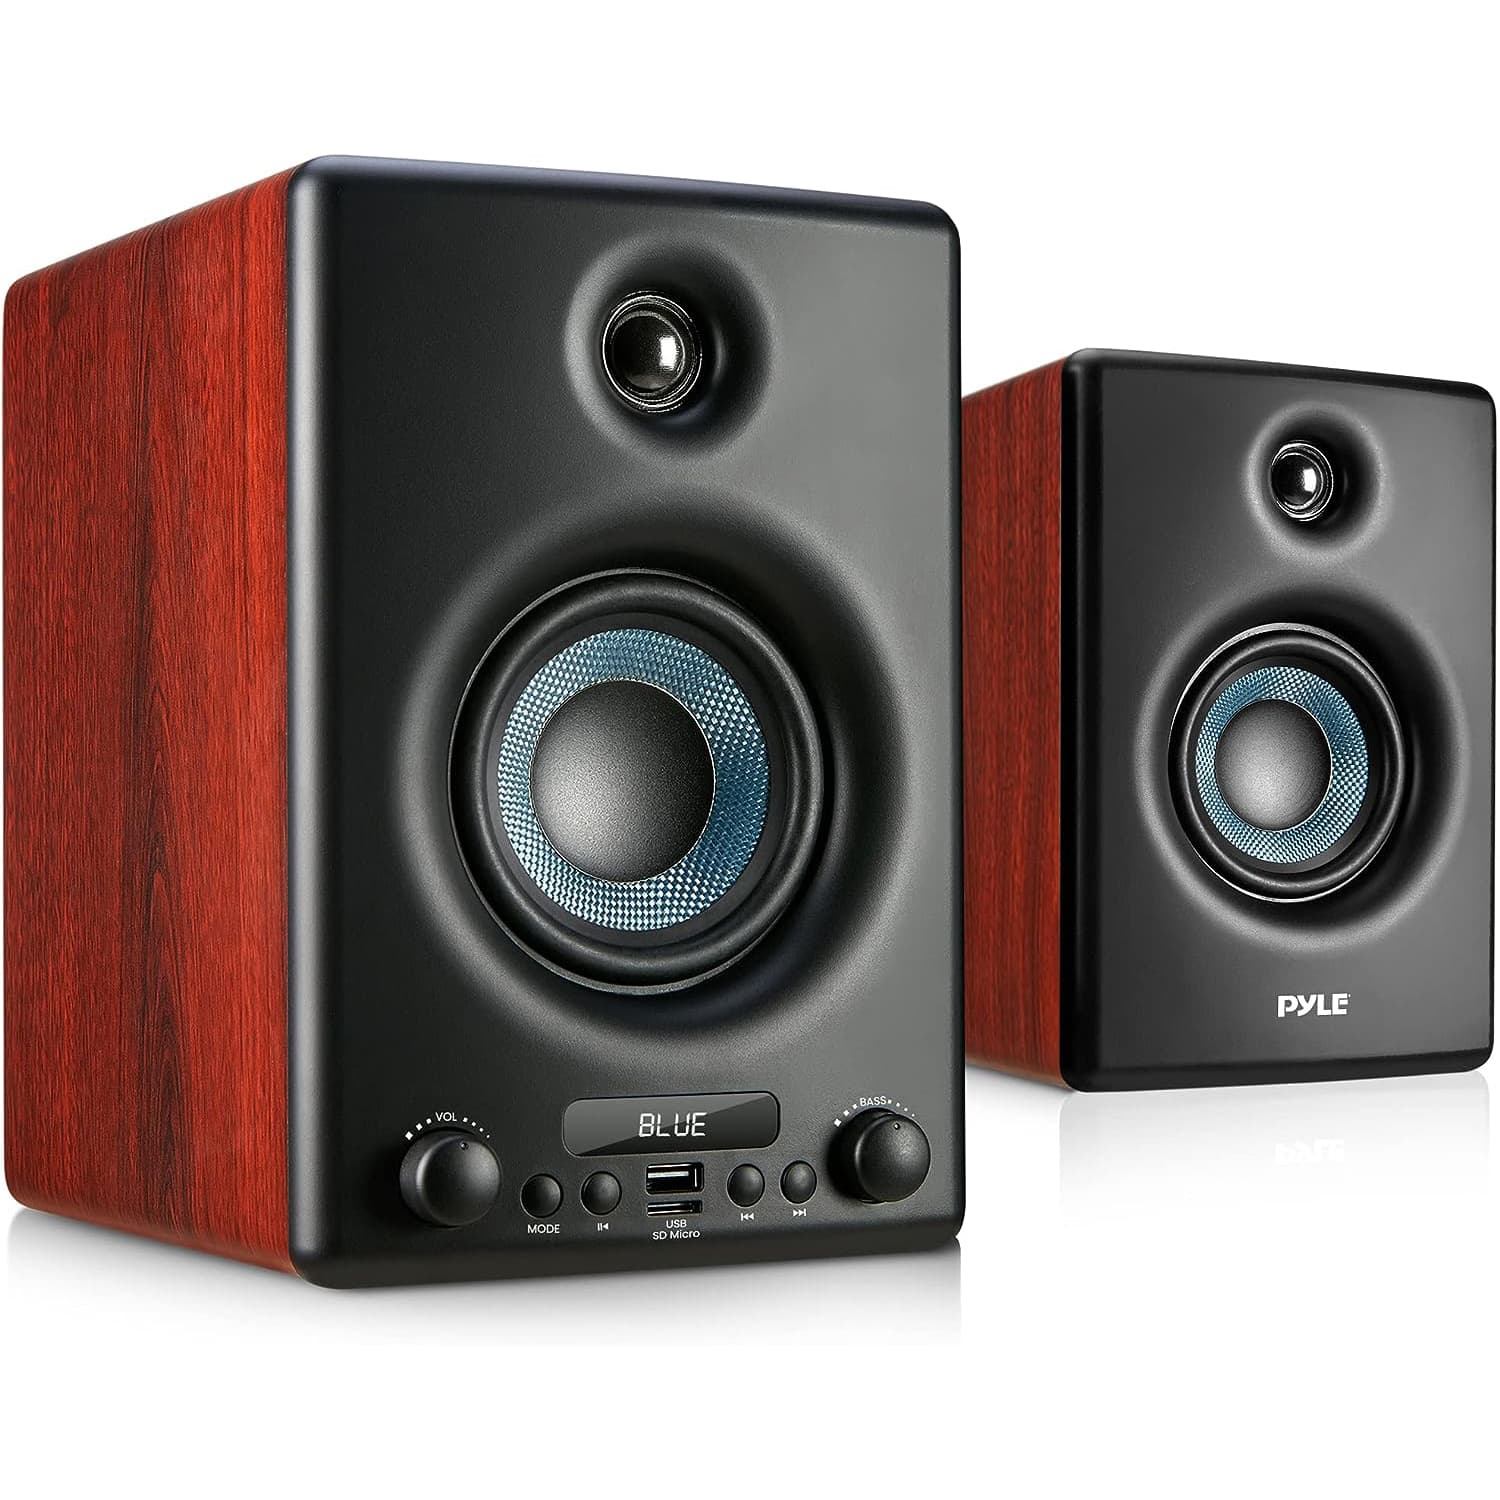 Pyle Wooden Designed HiFi Bluetooth Stereo Speaker System 300W Active Bookshelf Speaker with Professional Sound Quality